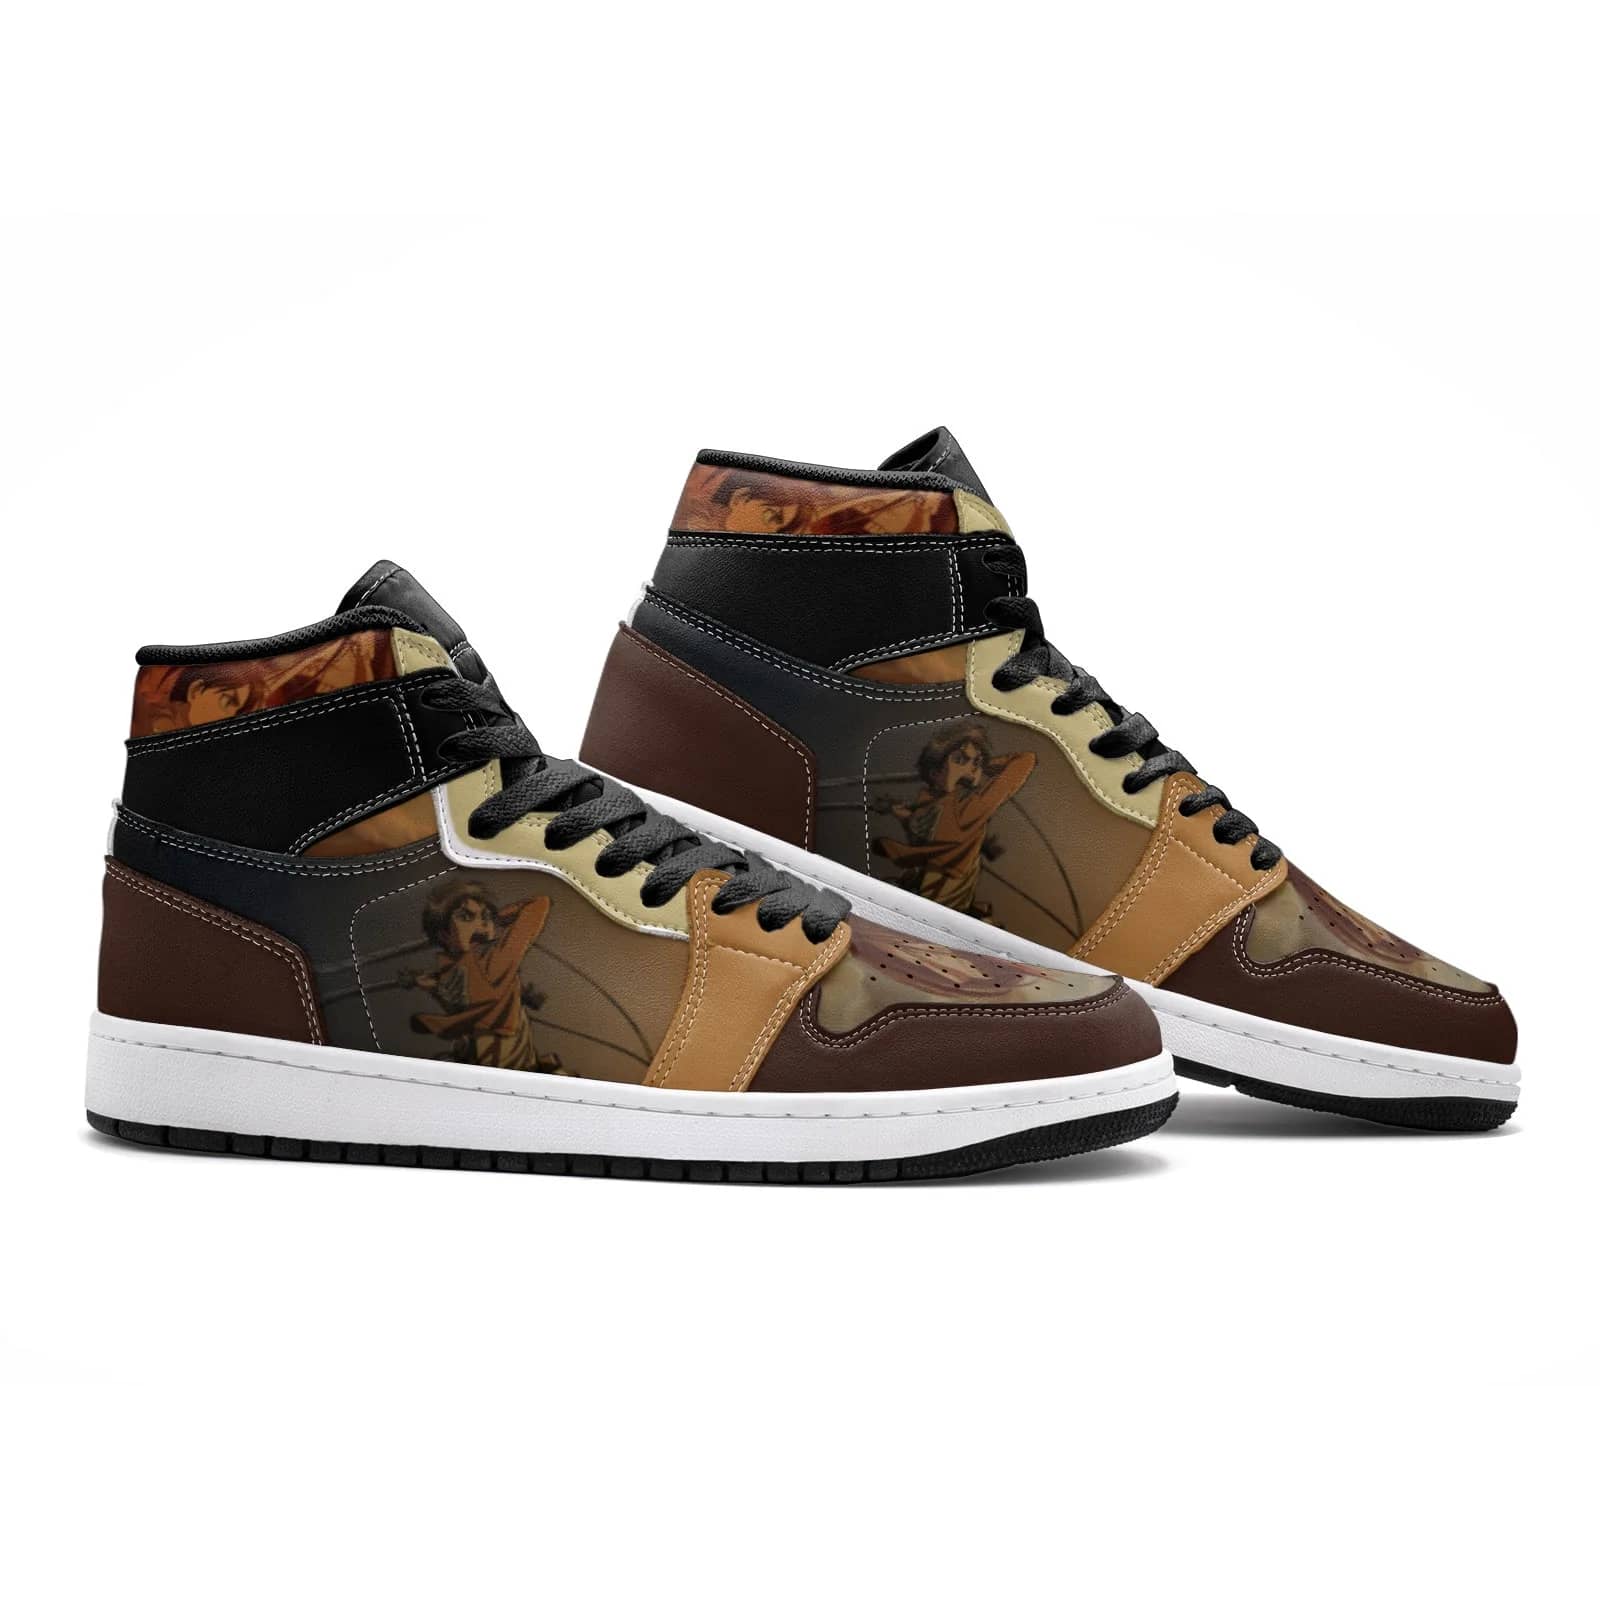 Inktee Store - Eren Yeager Attack On Titan Air Jordan Shoes Image